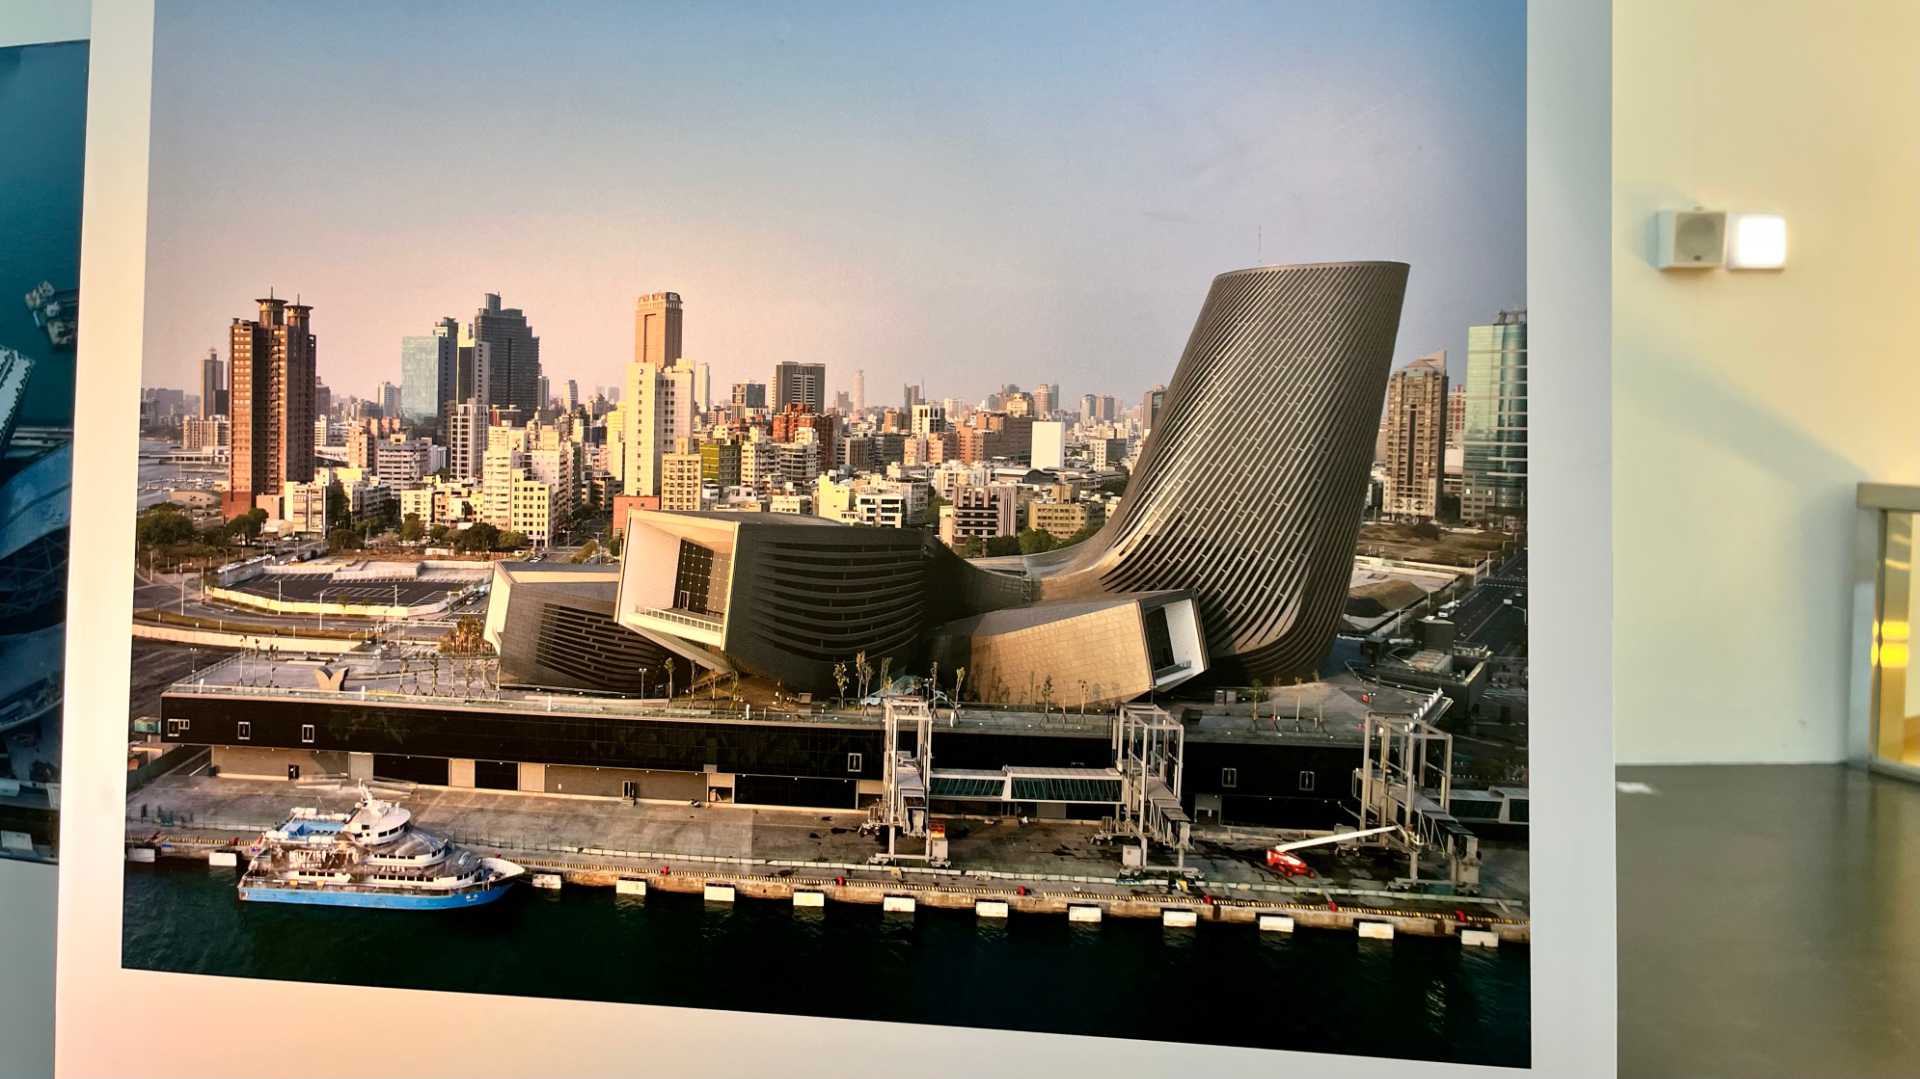 Printed aerial photo of the seaward side of the Kaohsiung Port Cruise Terminal. The building looks completed, although there is still a mobile crane visible in the foreground.